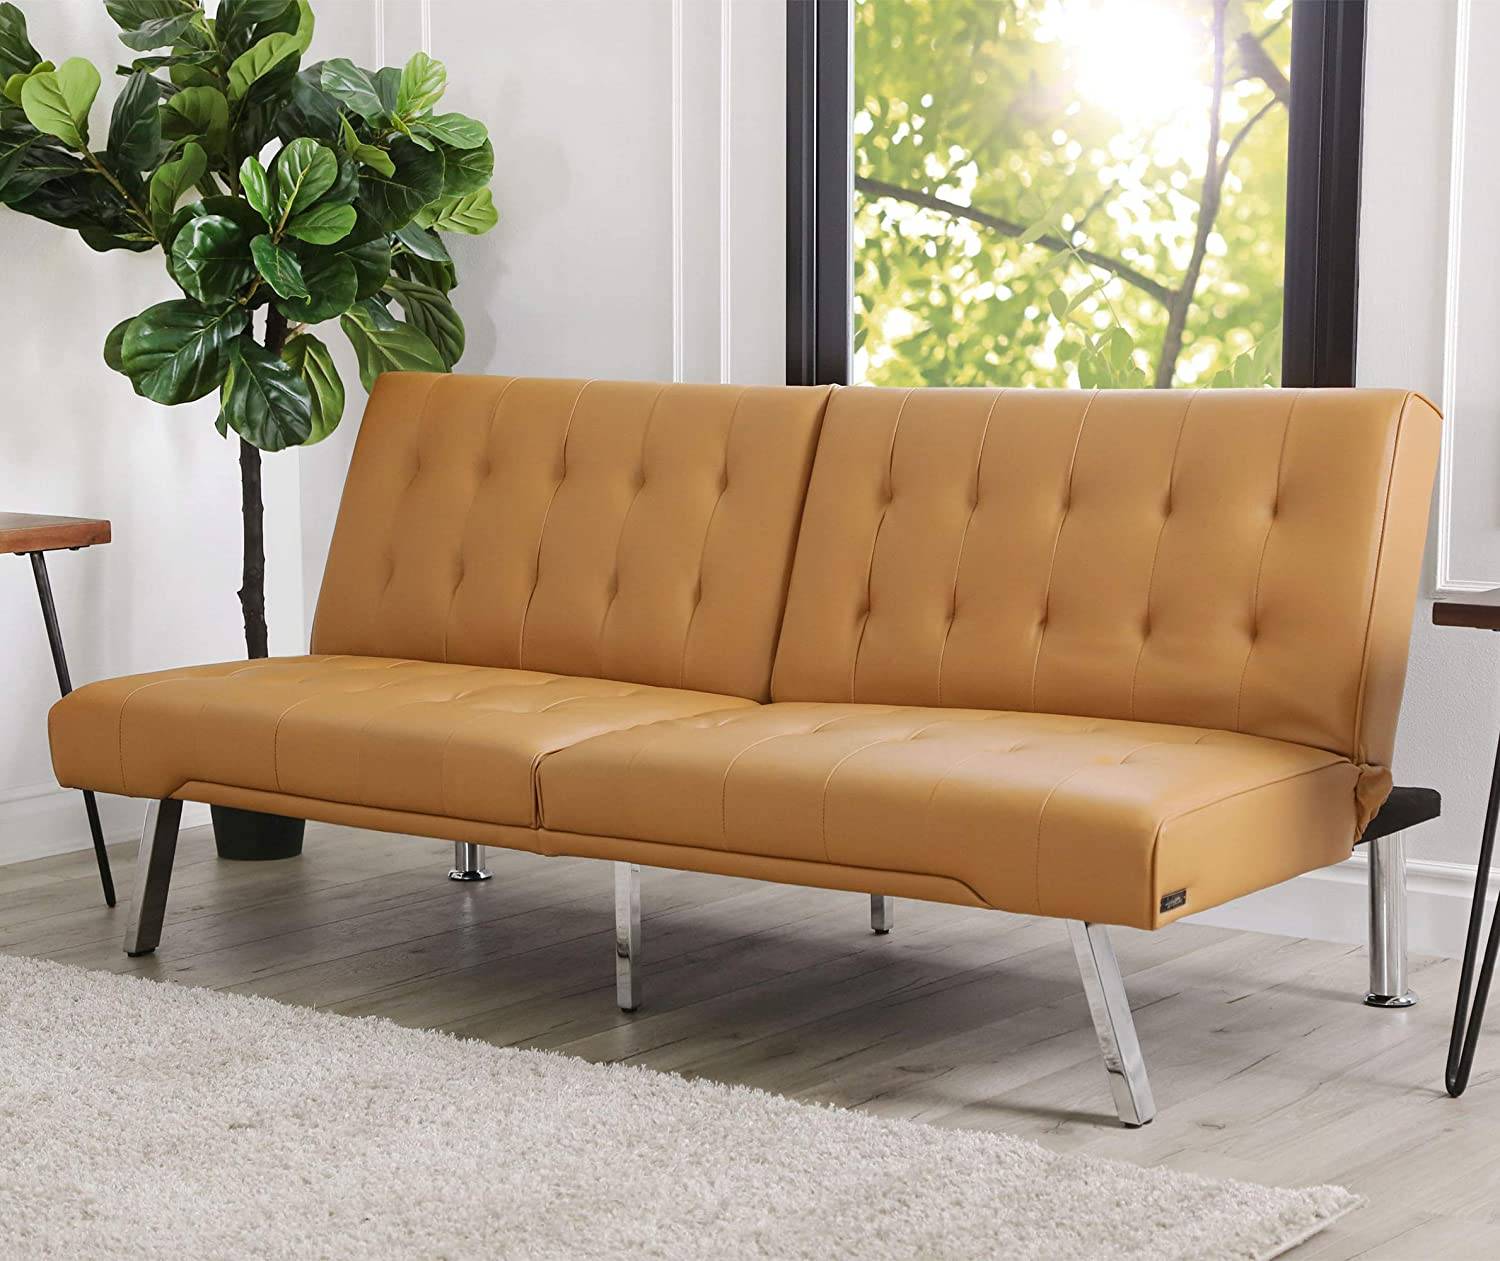 Kenzie Leather Foldable Futon Sofa Bed from Sam's Club